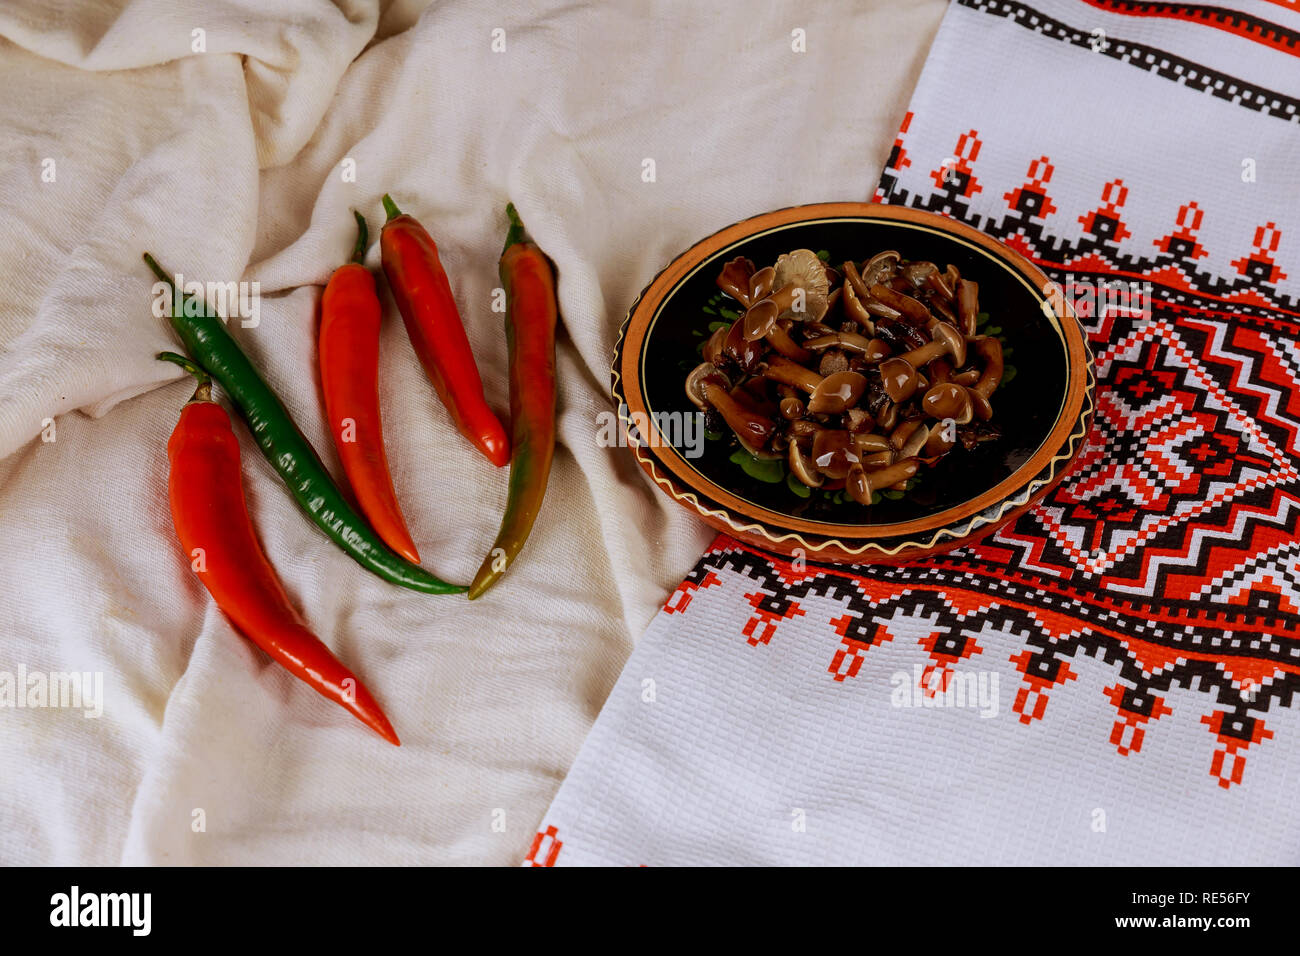 Dish from pickled mushrooms, red bitter pepper on the table, Ukrainian embroidered towel Stock Photo